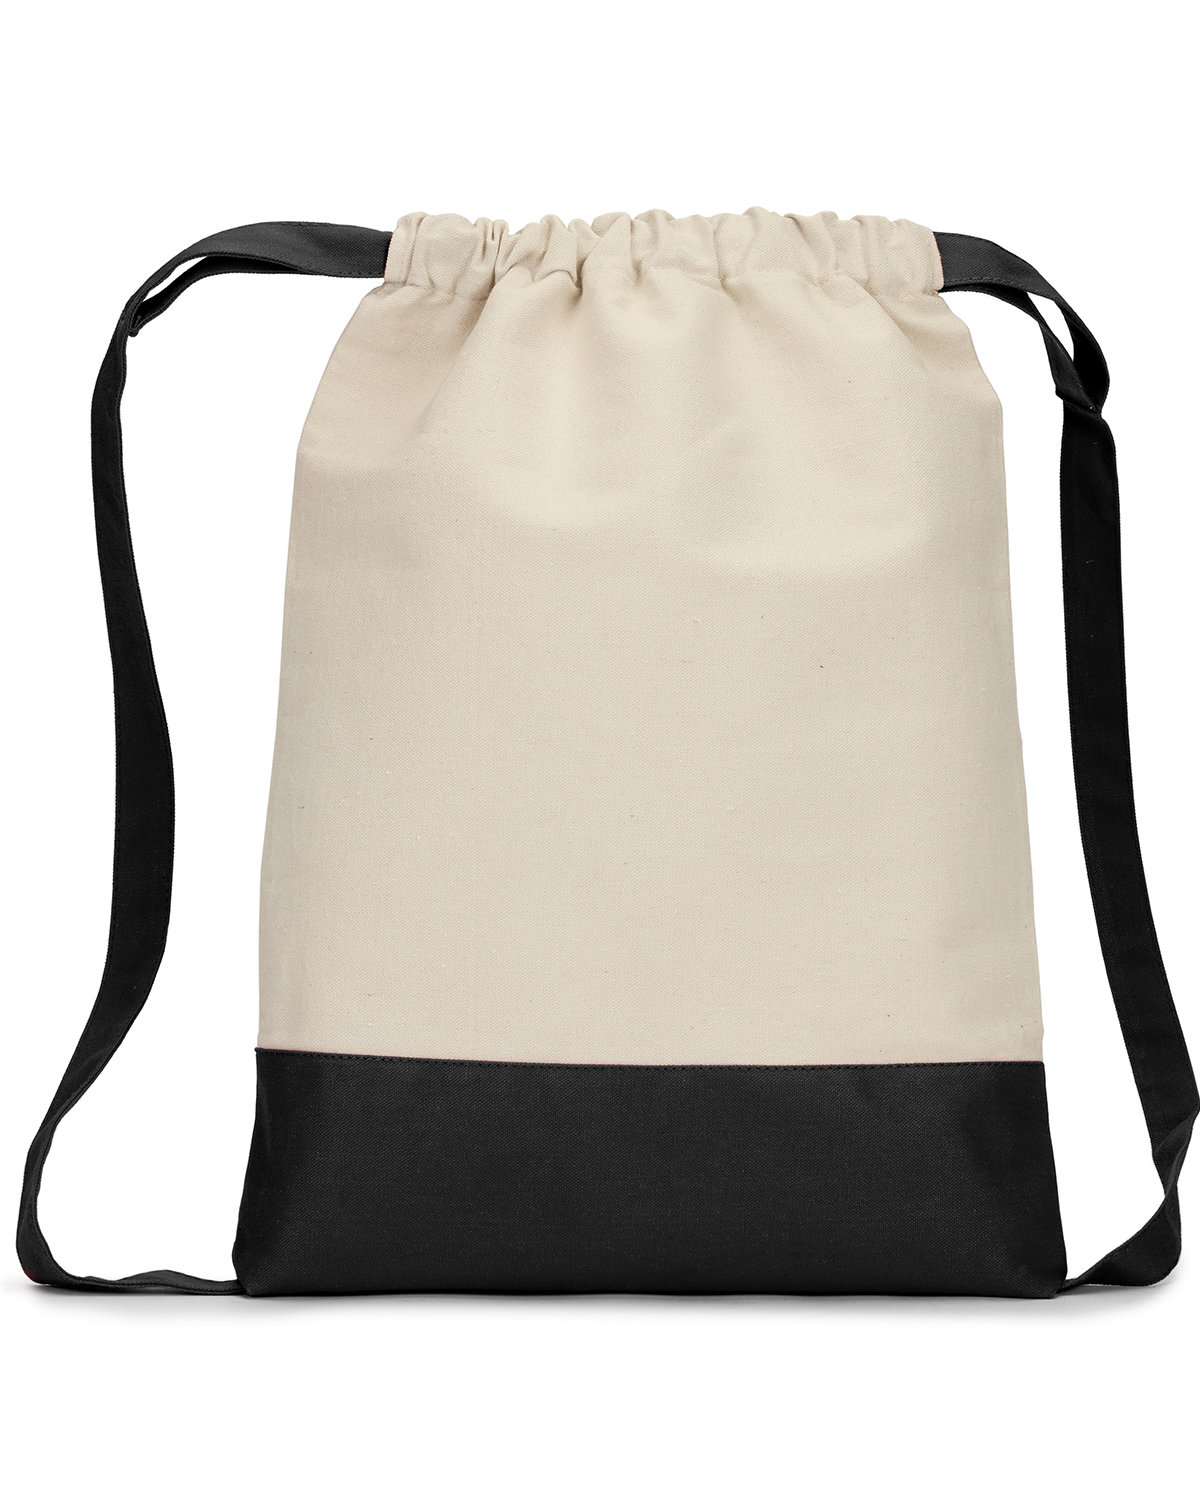 Cape Cod Cotton Drawstring Backpack-Liberty Bags